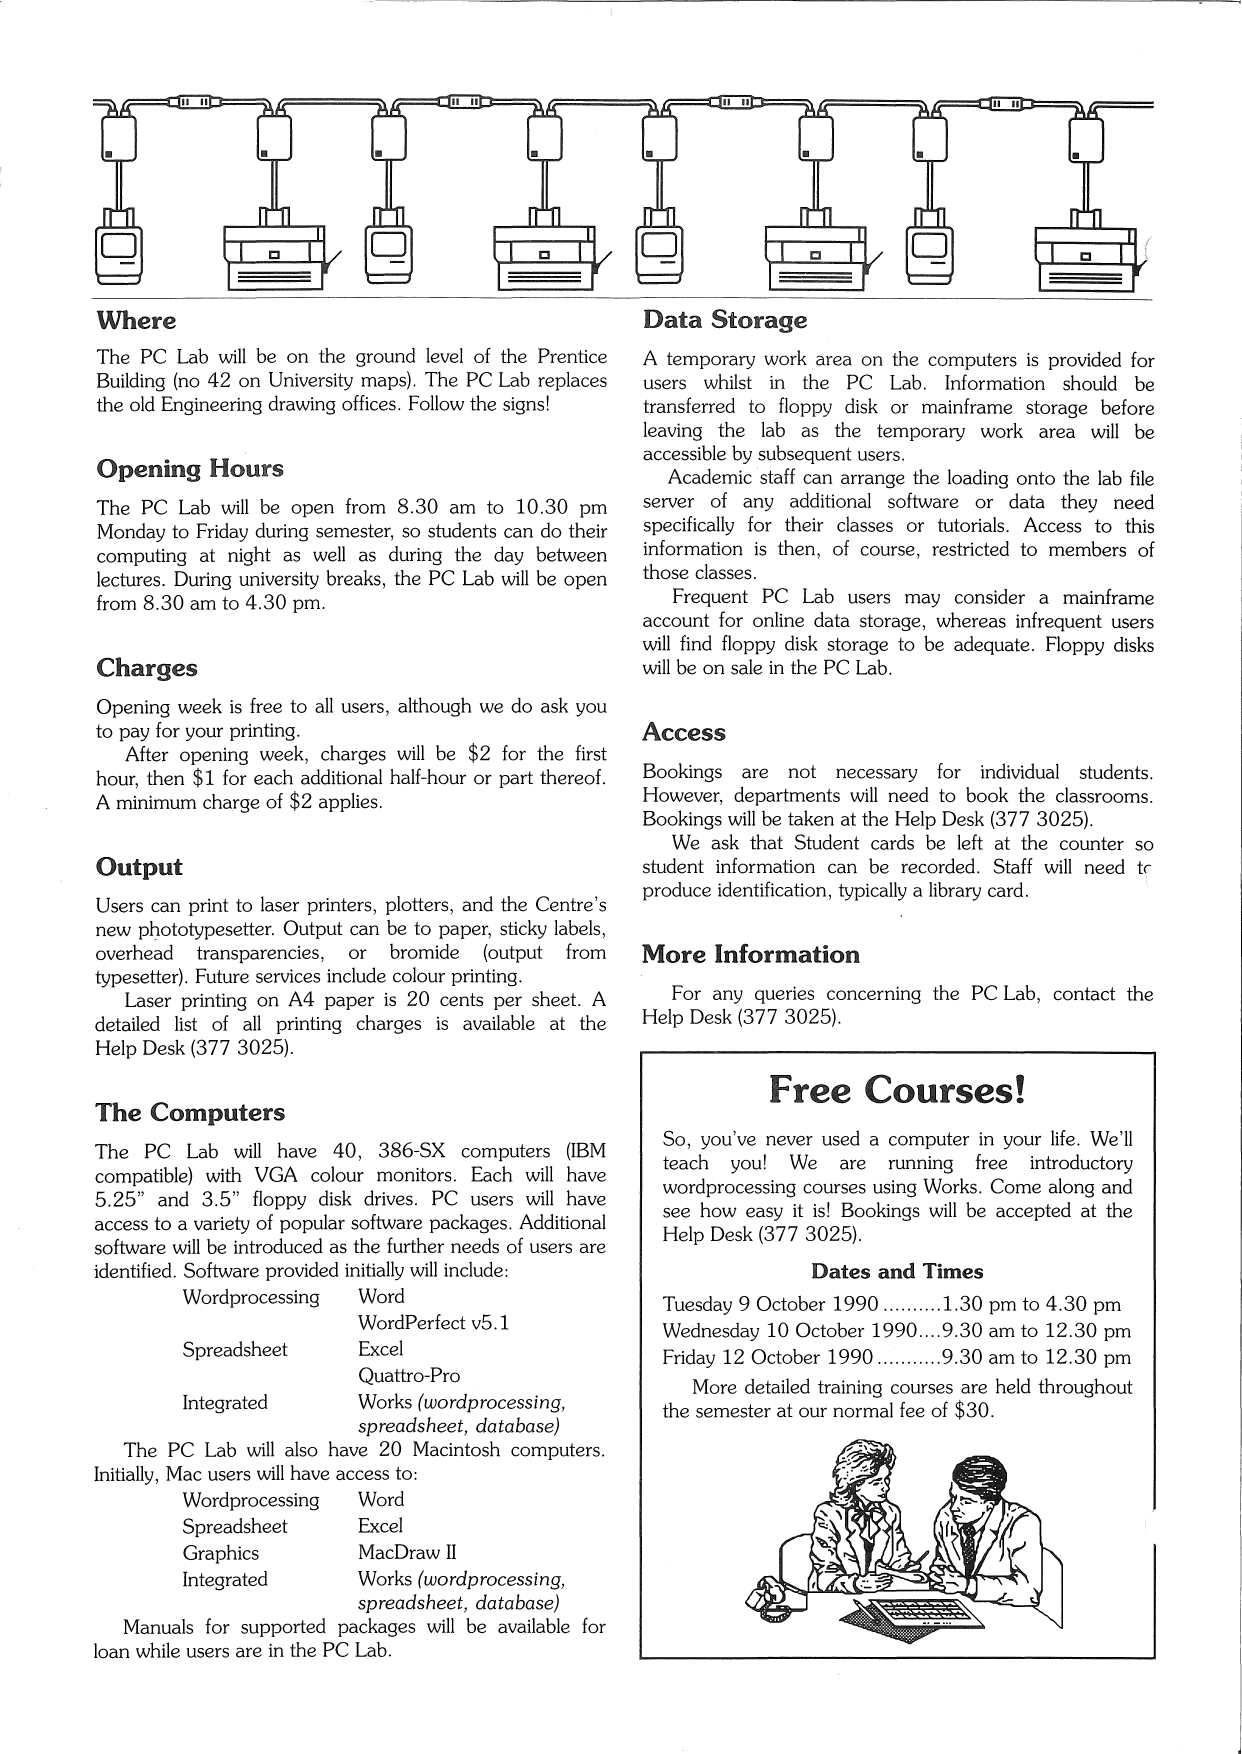 Page 2 of 2 - The Prentice Bulletin Number 14, October 1990